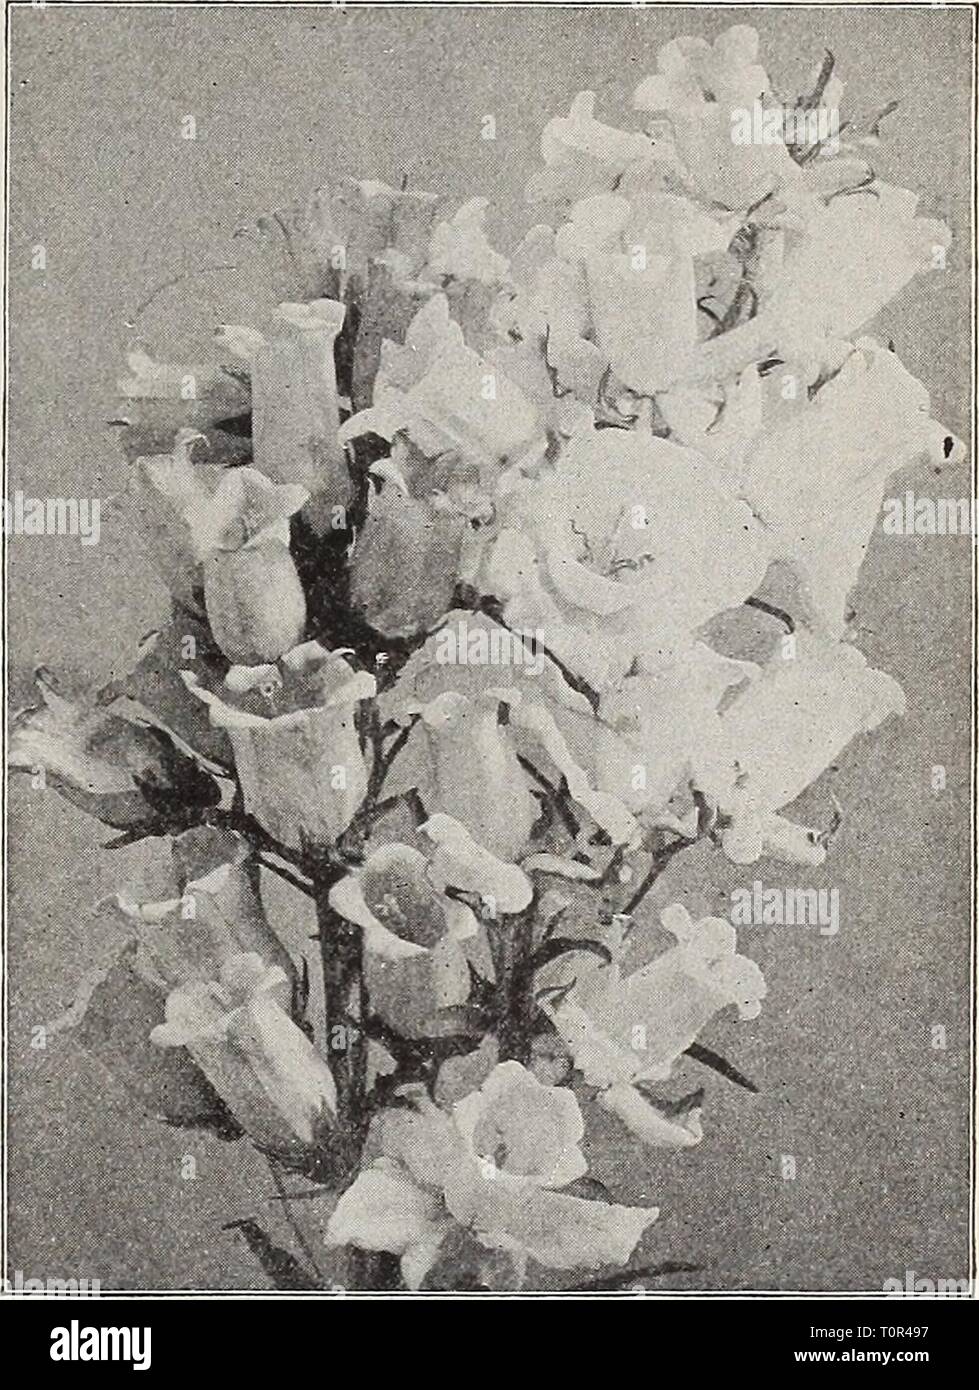 Dreer's autumn catalogue 1911 (1911) Dreer's autumn catalogue 1911  dreersautumncata1911henr Year: 1911  HENRTADREER â PHIlADftPHIA-^'A- Rf LIABLE f LOWER SEEDS 65 Campanula. (Bellflower.) Per Pkt. Carpatica {Carpathian Hare-Bell). In bloom the whole season; hardy perennial; blue; 6 inches. Per ^ oz., 25 cts 5 â Alba. White-flowered form. Per K oz.. 25 cts... 5 Latifolia Macreintha. A handsome variety, bearing in May and June large purplish-blue flowers; 3 feet 15 Persicifolia Grandiflora (Peach Bells). One of the finest; grows 2 to 3 feet high, with large flowers; blue 10 â Alba. White flower Stock Photo